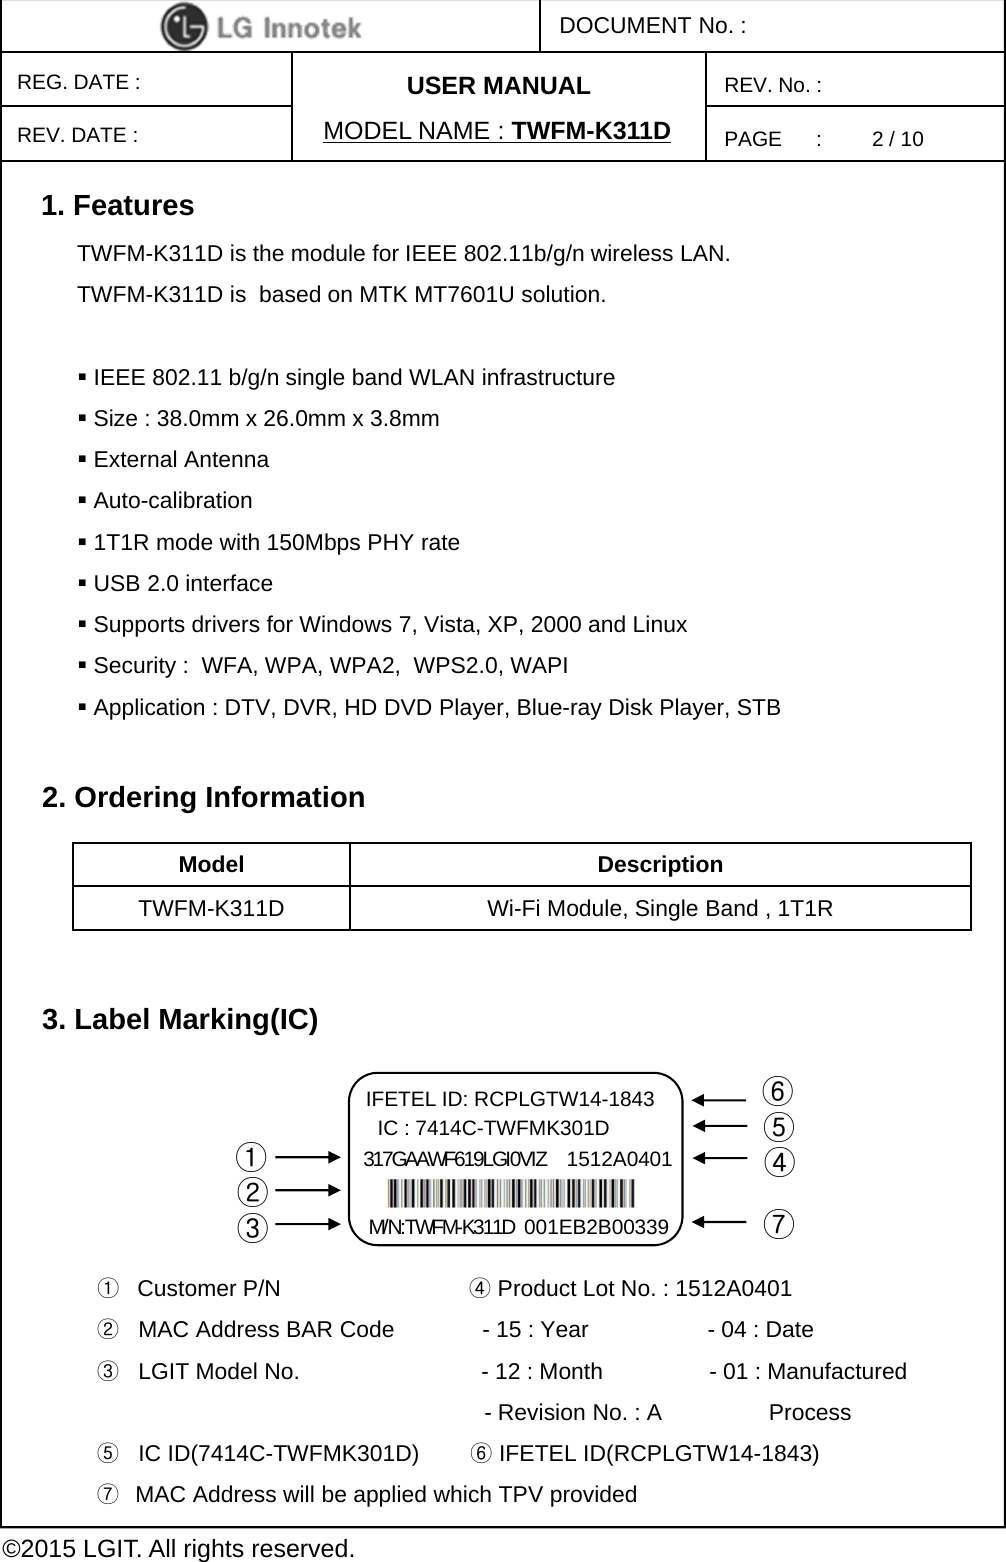 PAGE      :DOCUMENT No. :REG. DATE :MODEL NAME : TWFM-K311DREV. No. :©2015 LGIT. All rights reserved.REV. DATE :USER MANUAL2. Ordering InformationModel DescriptionTWFM-K311D Wi-Fi Module, Single Band , 1T1R1. FeaturesTWFM-K311D is the module for IEEE 802.11b/g/n wireless LAN. TWFM-K311D is  based on MTK MT7601U solution.IEEE 802.11 b/g/n single band WLAN infrastructureSize : 38.0mm x 26.0mm x 3.8mmExternal AntennaAuto-calibration1T1R mode with 150Mbps PHY rate USB 2.0 interfaceSupports drivers for Windows 7, Vista, XP, 2000 and LinuxSecurity :  WFA, WPA, WPA2, WPS2.0, WAPIApplication : DTV, DVR, HD DVD Player, Blue-ray Disk Player, STB3. Label Marking(IC)①Customer P/N                              ④Product Lot No. : 1512A0401 ②MAC Address BAR Code              - 15 : Year                   - 04 : Date③LGIT Model No.                             - 12 : Month                 - 01 : Manufactured- Revision No. : A                 Process⑤IC ID(7414C-TWFMK301D)        ⑥IFETEL ID(RCPLGTW14-1843)⑦MAC Address will be applied which TPV provided①②③M/N:TWFM-K311D 001EB2B00339④IC : 7414C-TWFMK301D  ⑤IFETEL ID: RCPLGTW14-1843  ⑥317GAAWF619LGI0VIZ 1512A0401⑦2 / 10